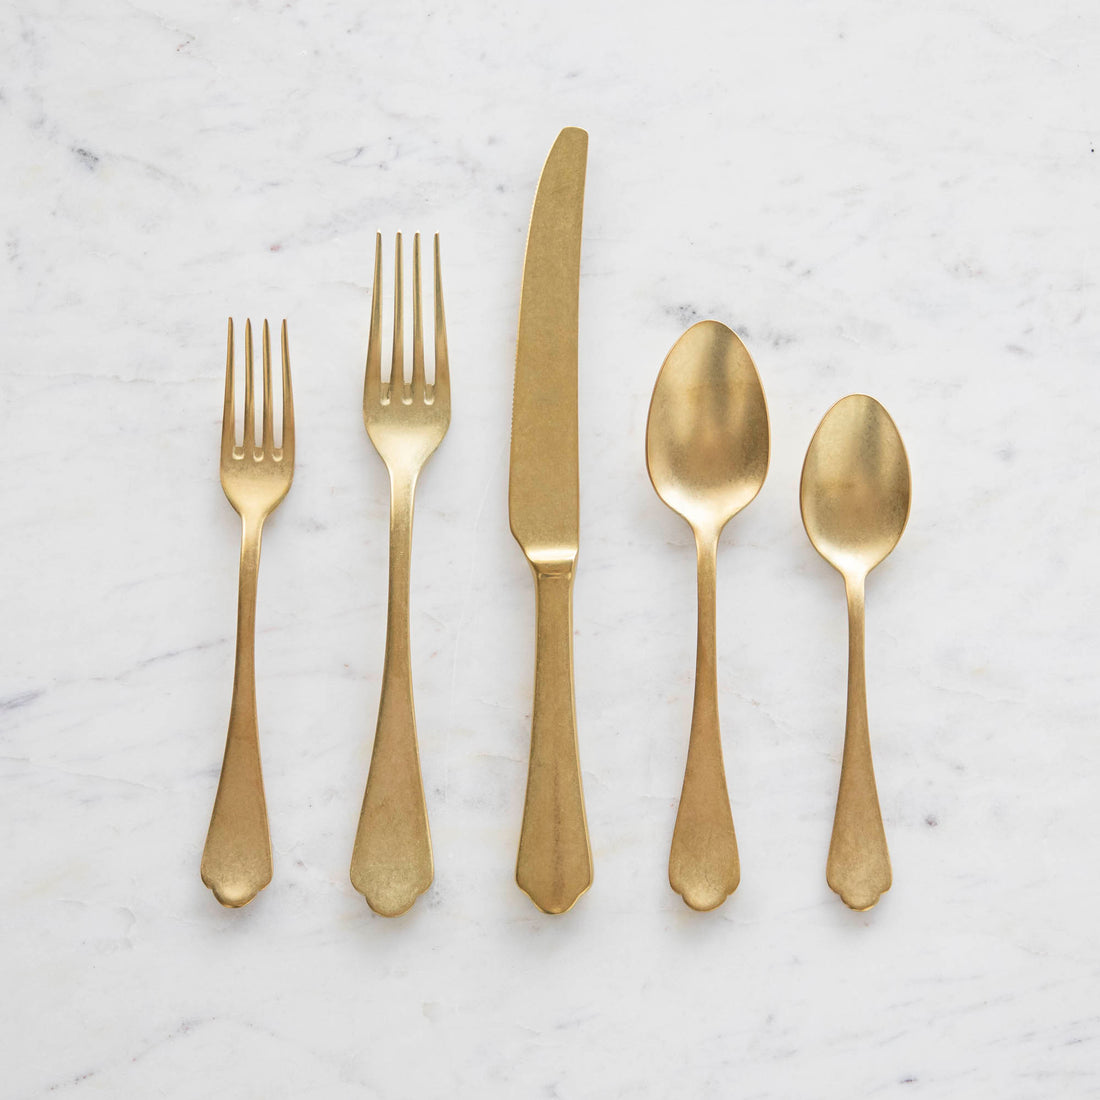 A set of Mepra Dolce Vita Pewter Oro 5-Piece Place Setting flatware, including two forks, a knife, and two spoons, neatly arranged on a marble surface.